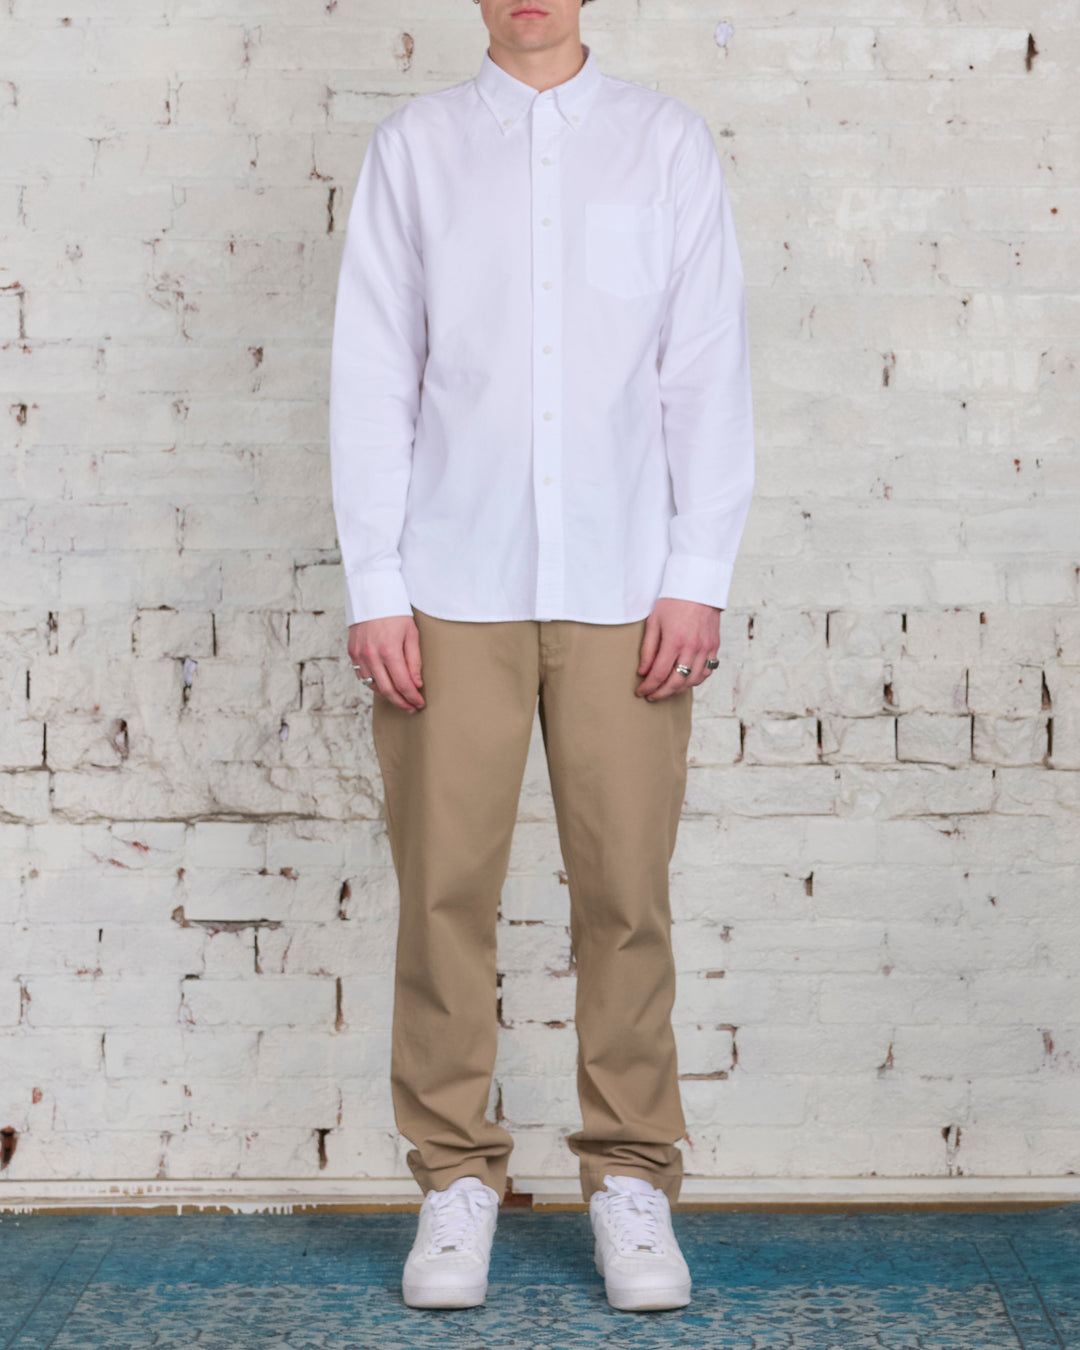 Reigning Champ Windsor Long Sleeve Oxford Button Shirt White